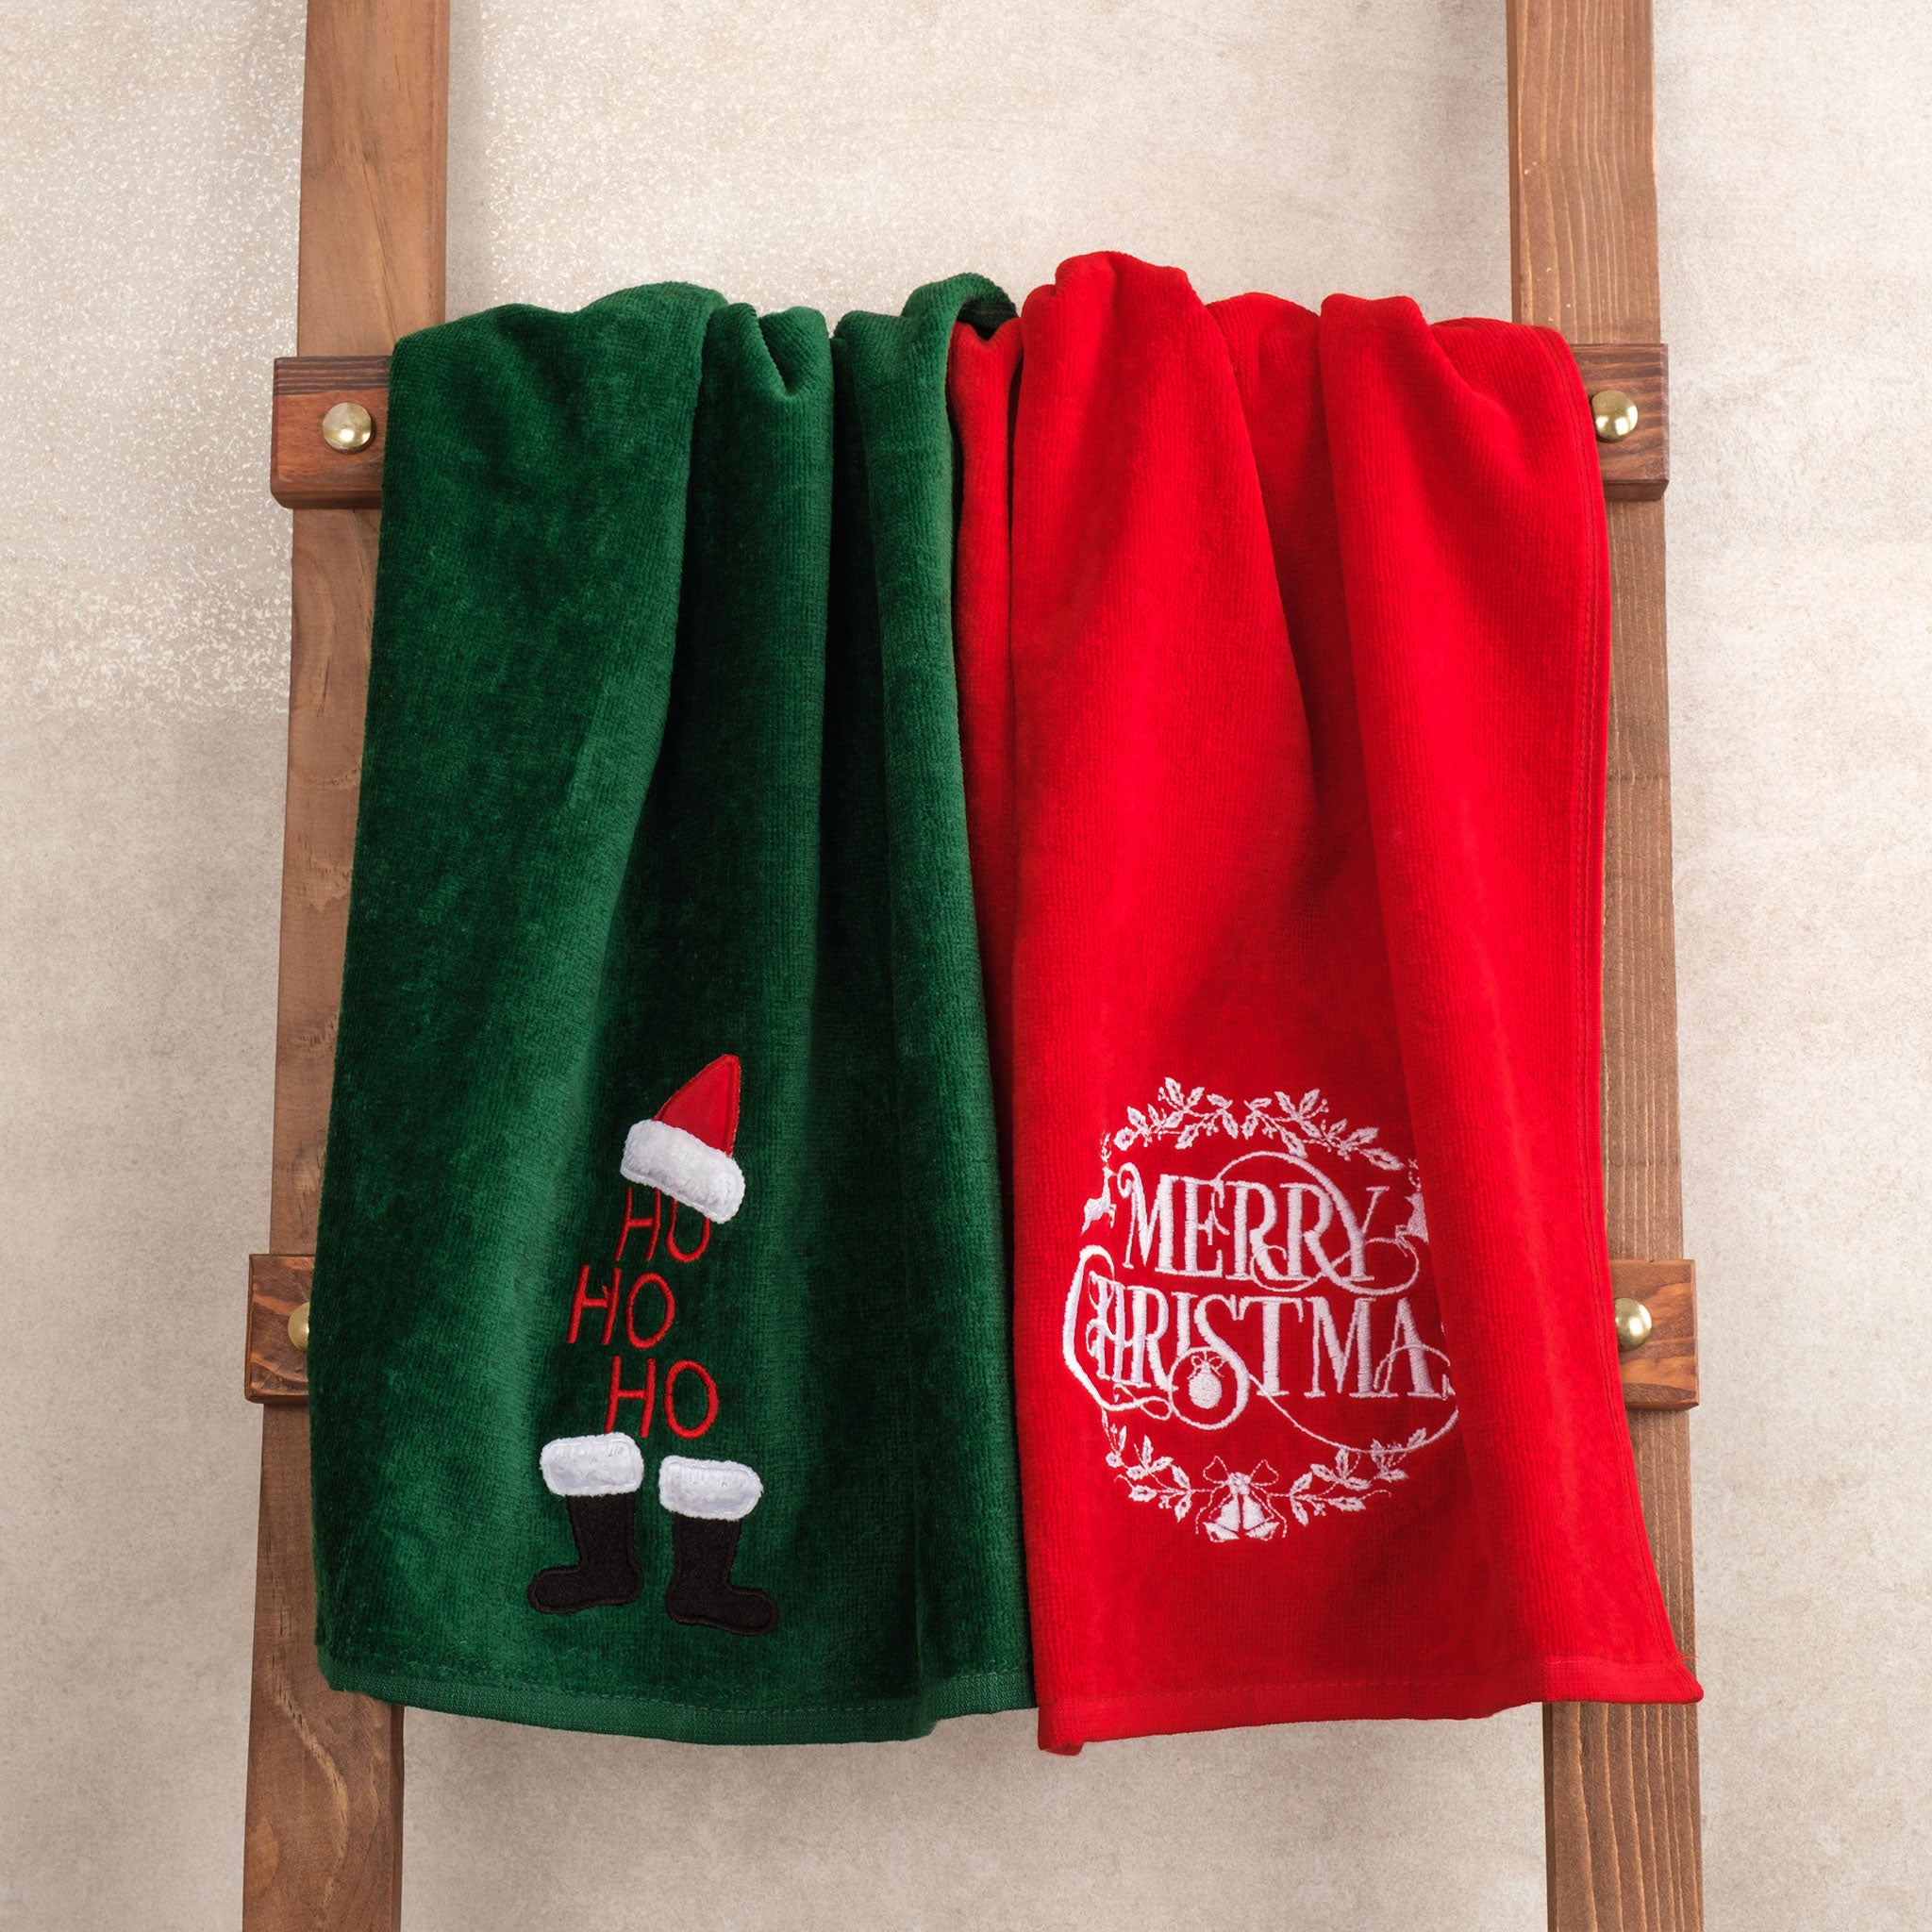 American Soft Linen - Christmas Towels 2 Packed Embroidered Towels for Decor Xmas - Merry-Hoho - 1